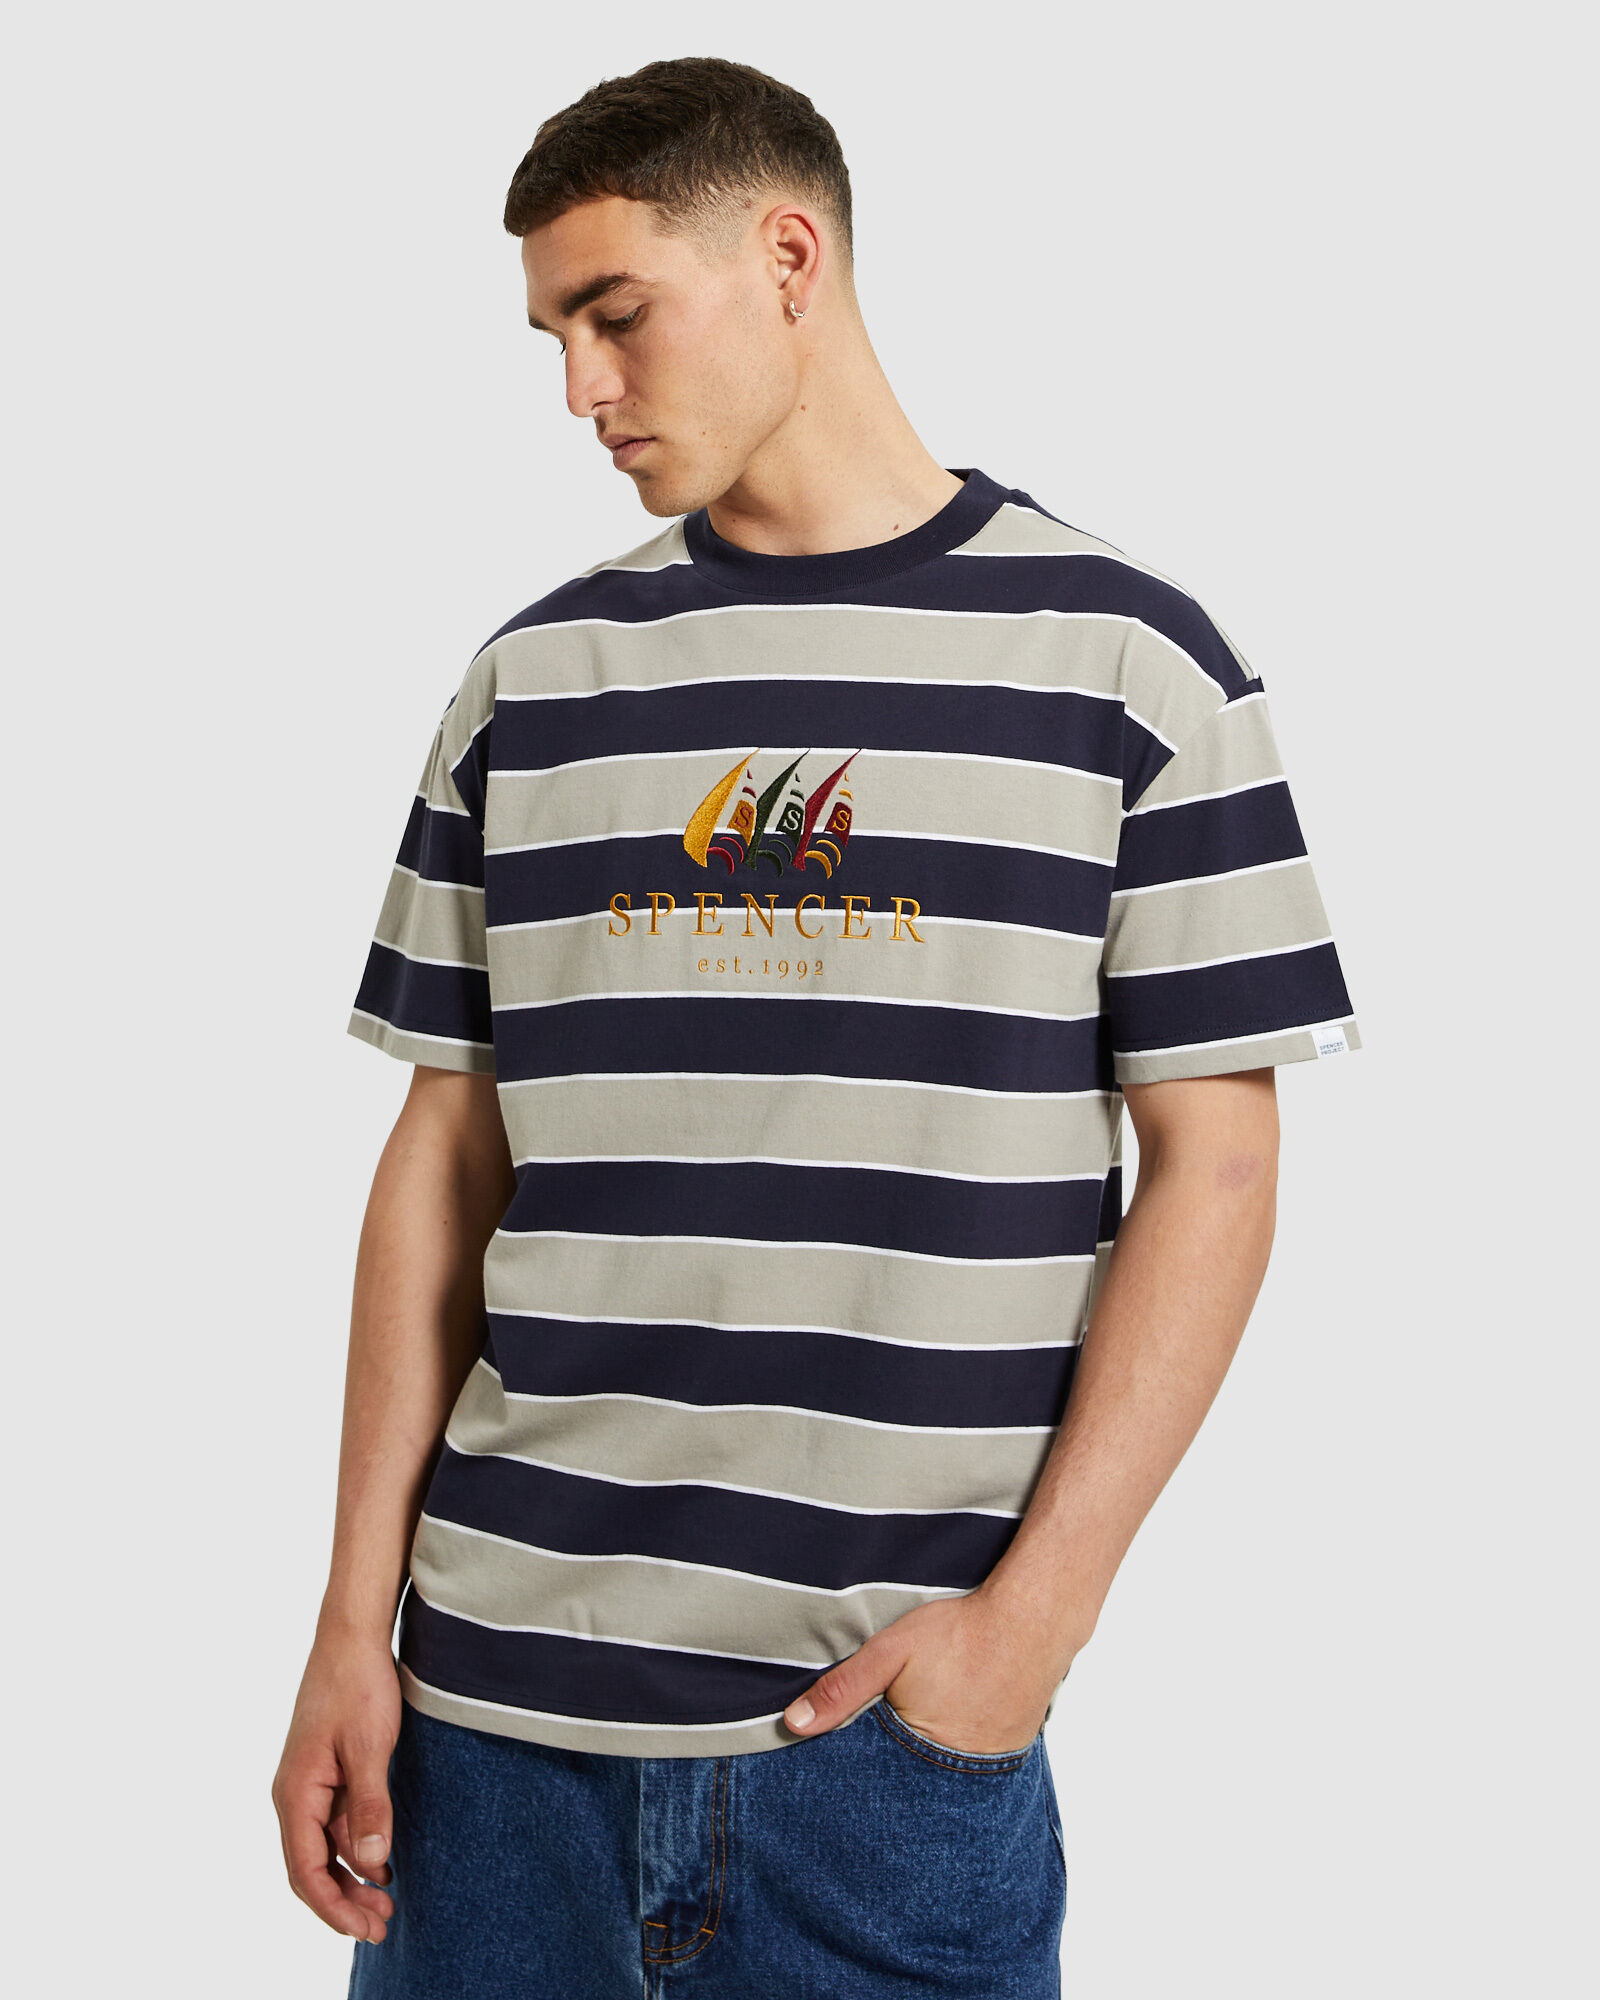 SPENCER PROJECT Oxford Stripe T-Shirt Navy/Grey | General Pants